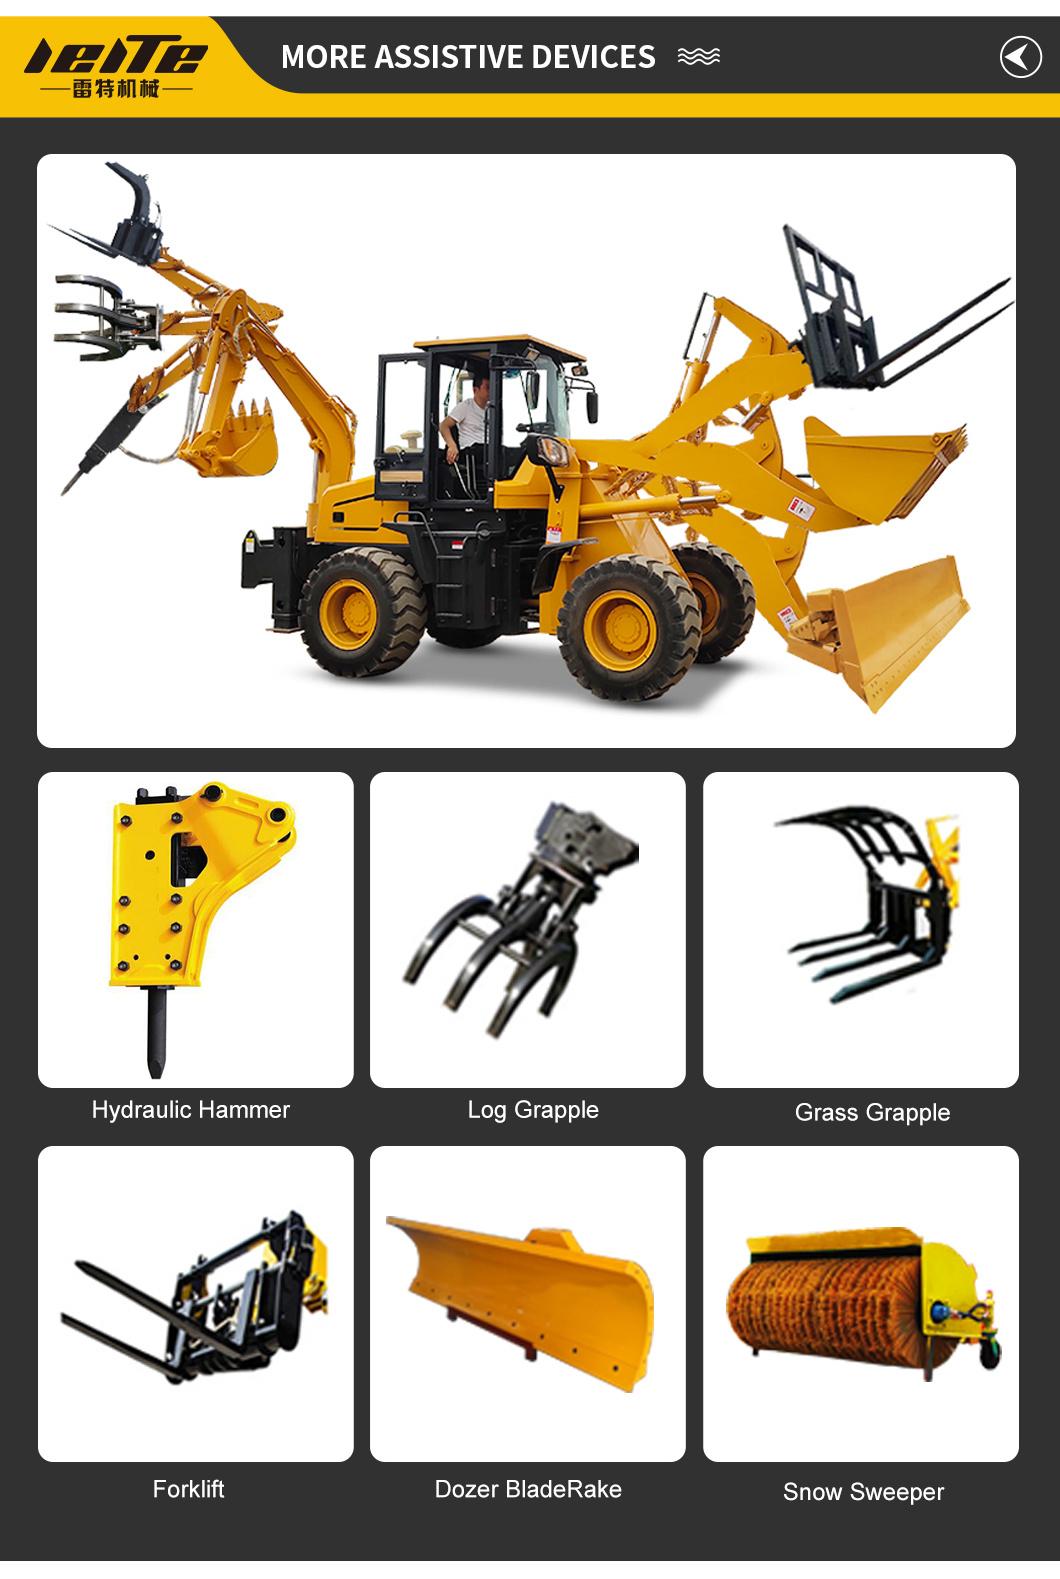 4WD Small Hydraulic Ractor with 0.32cbm Front End and Backhoe Loader